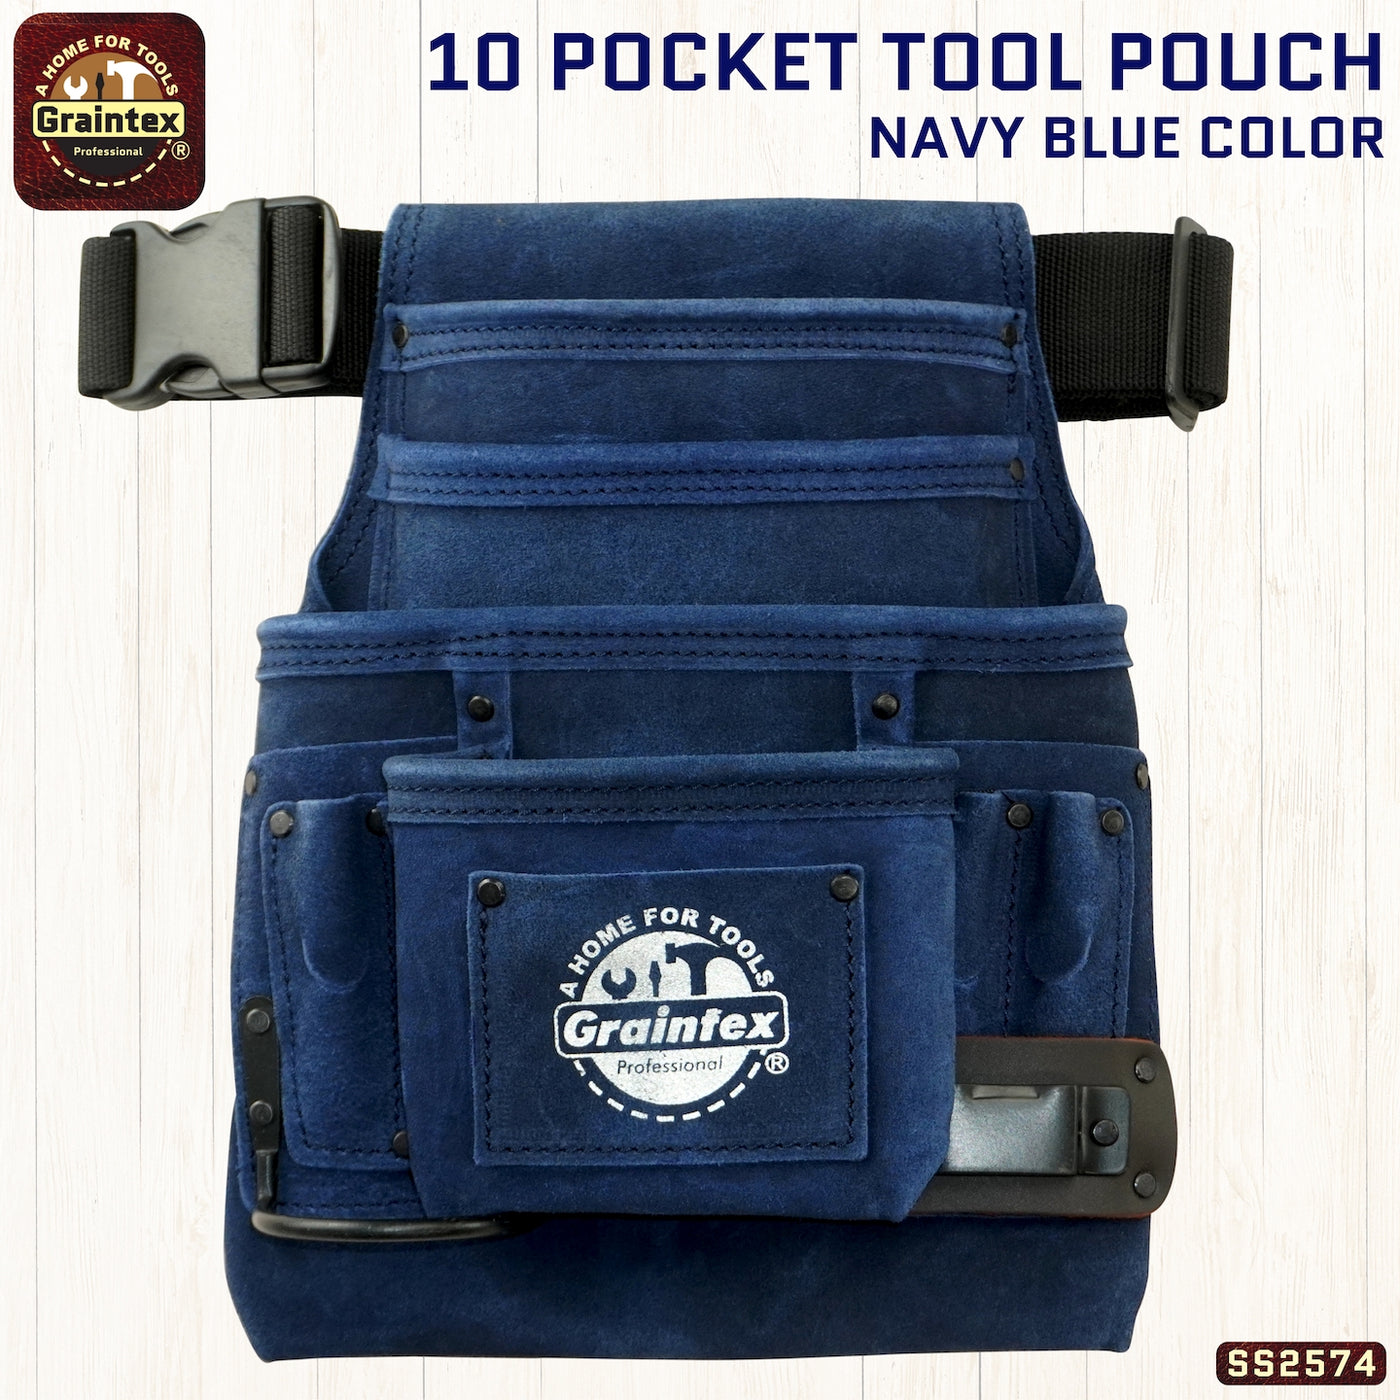 SS2574 :: 10 Pocket Nail & Tool Pouch Navy Blue Color Suede Leather with Belt